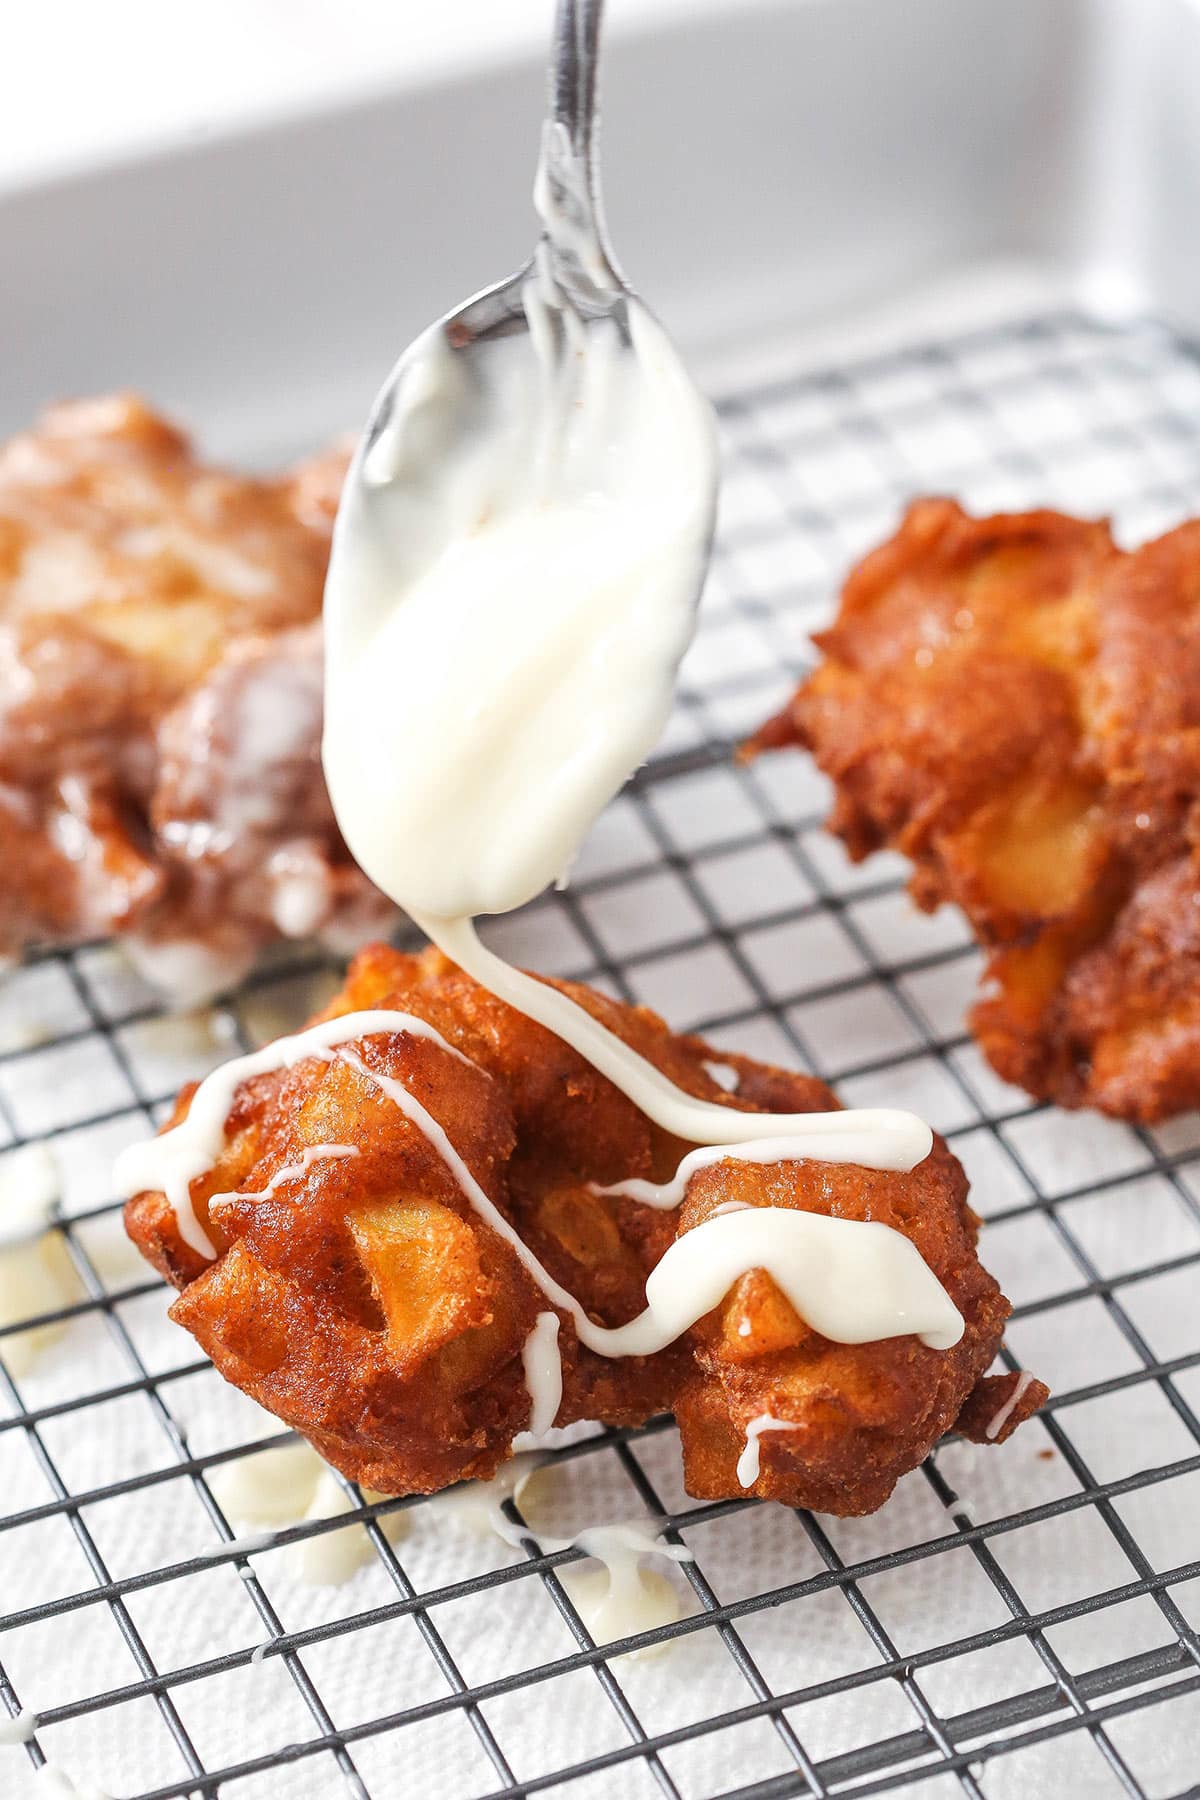 A spoon drizzling some homemade vanilla glaze over an apple fritter on a cooling rack